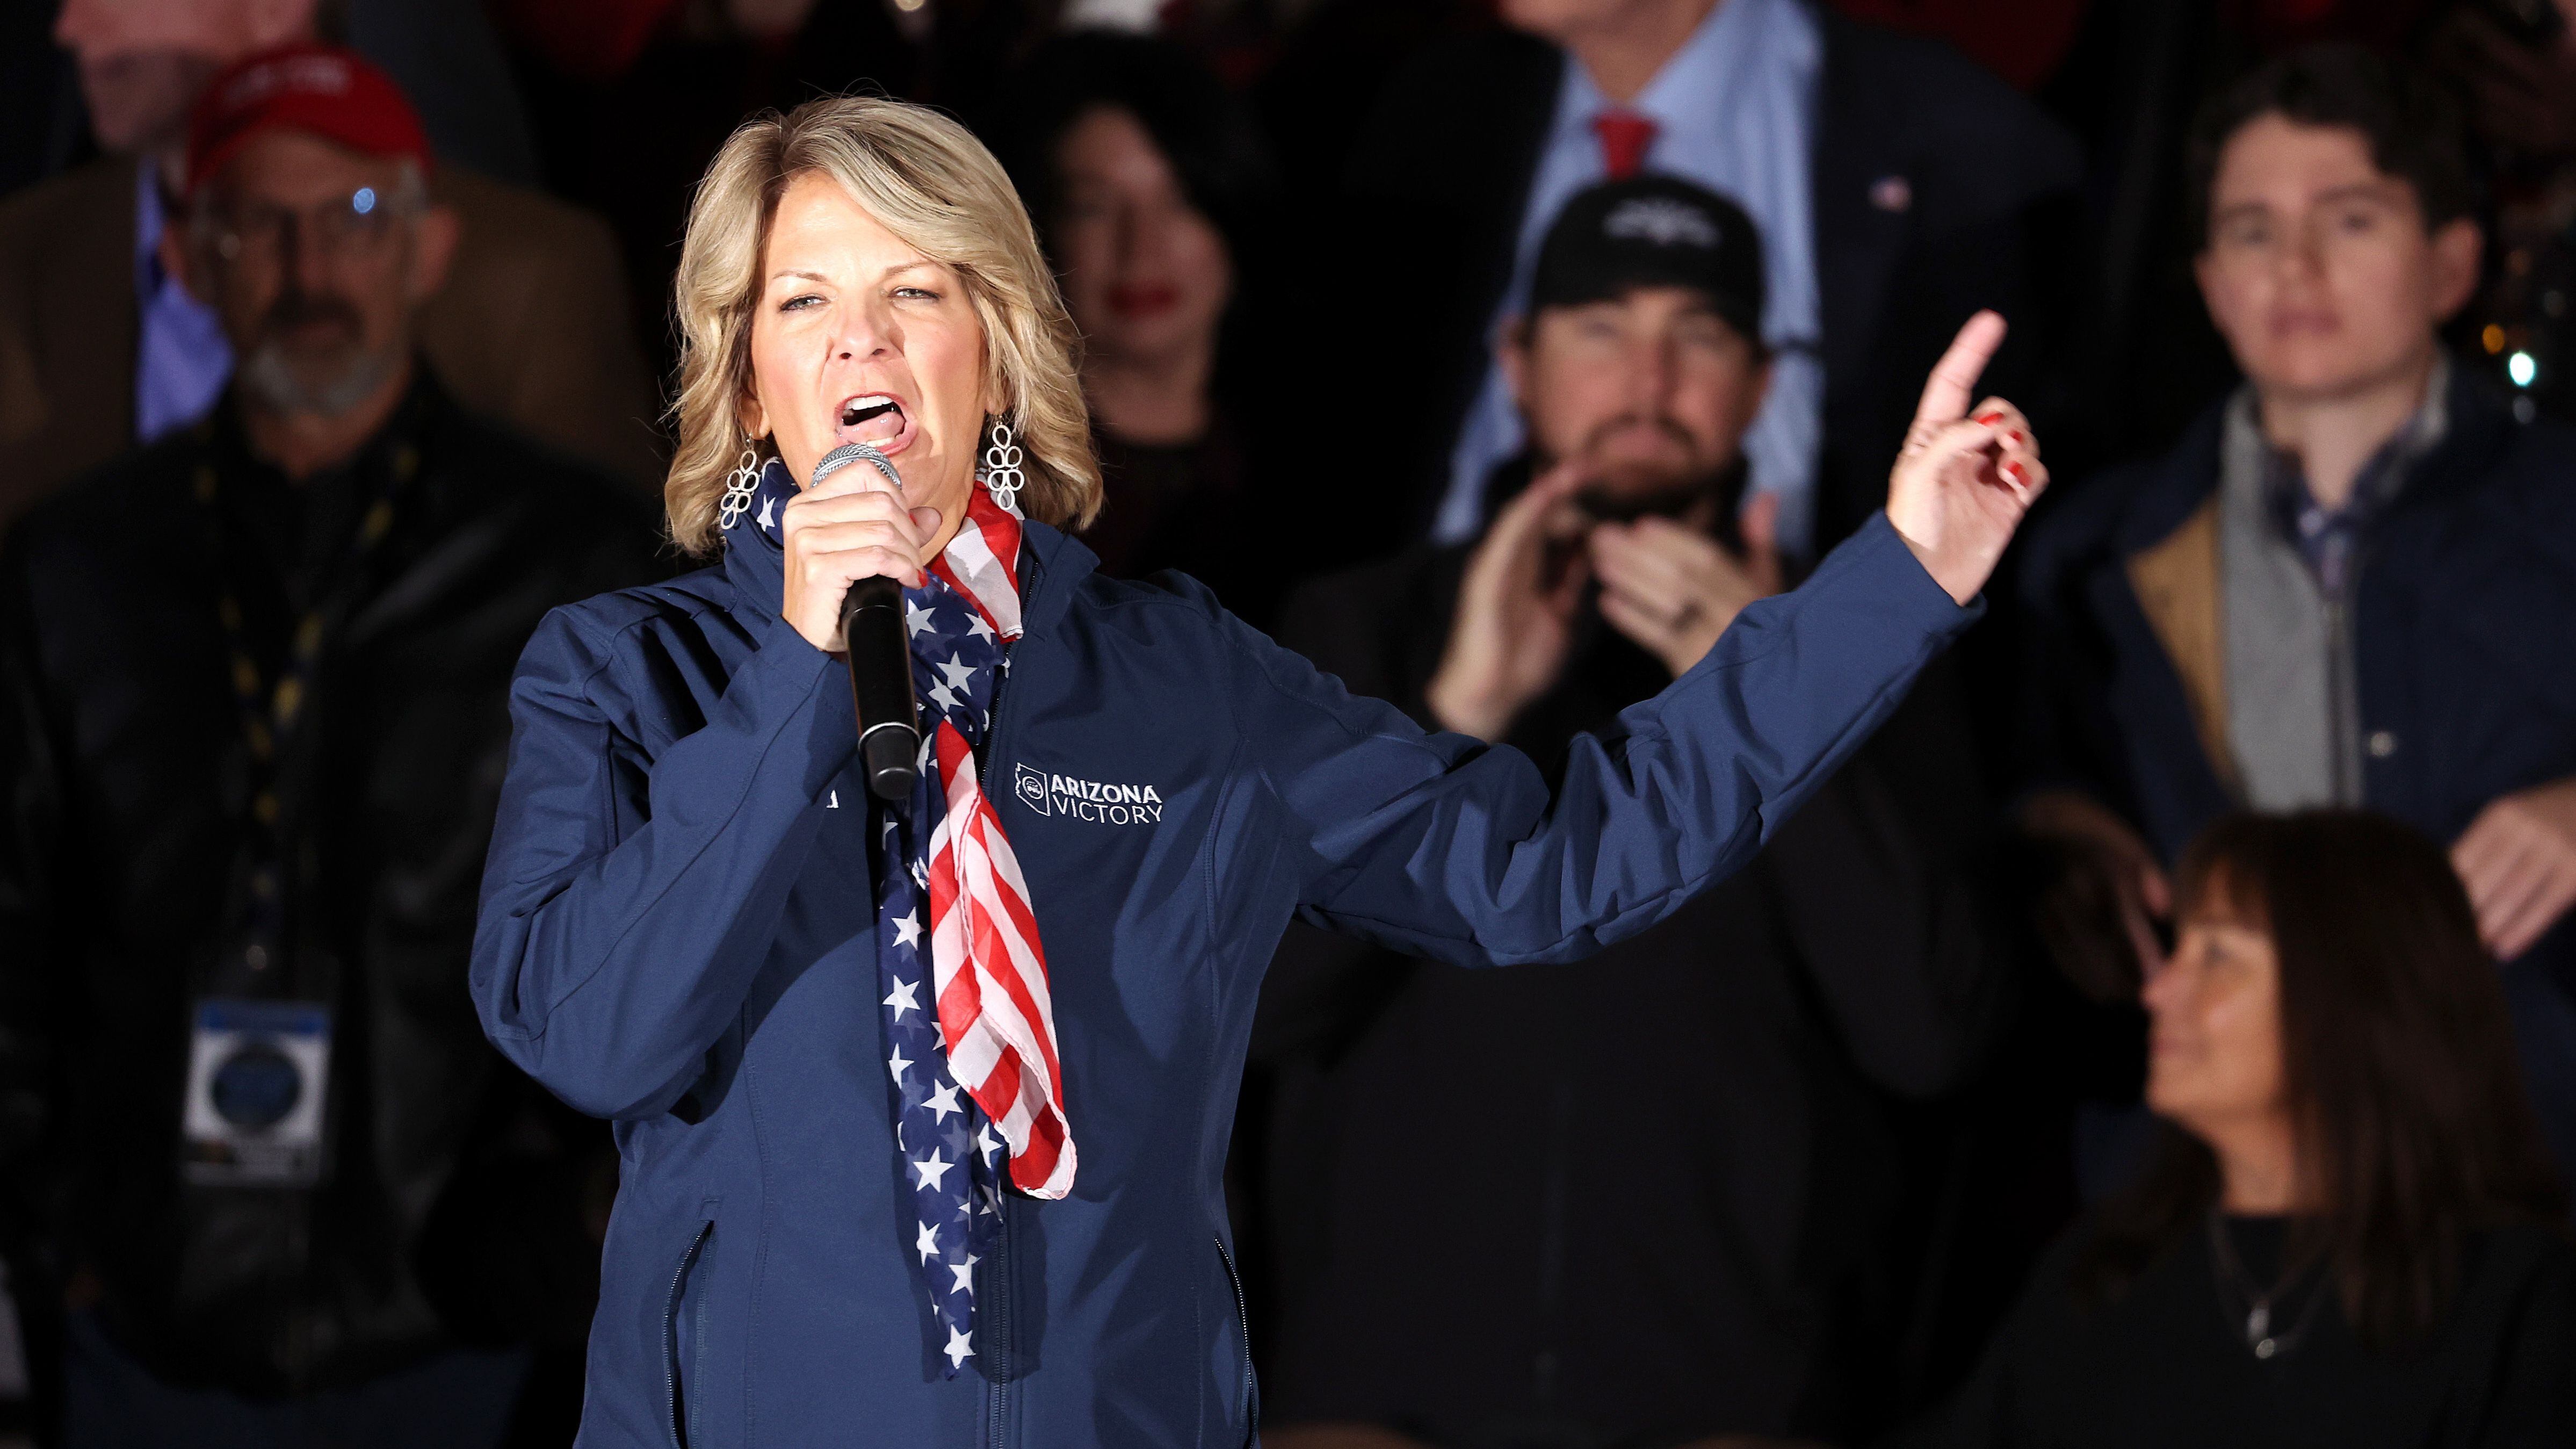 Then-Arizona Republican Party Chair Kelli Ward is seen at a rally on Nov. 7, 2022 in Prescott, Ariz. Ward has now been indicted on state charges for her role as a so-called 